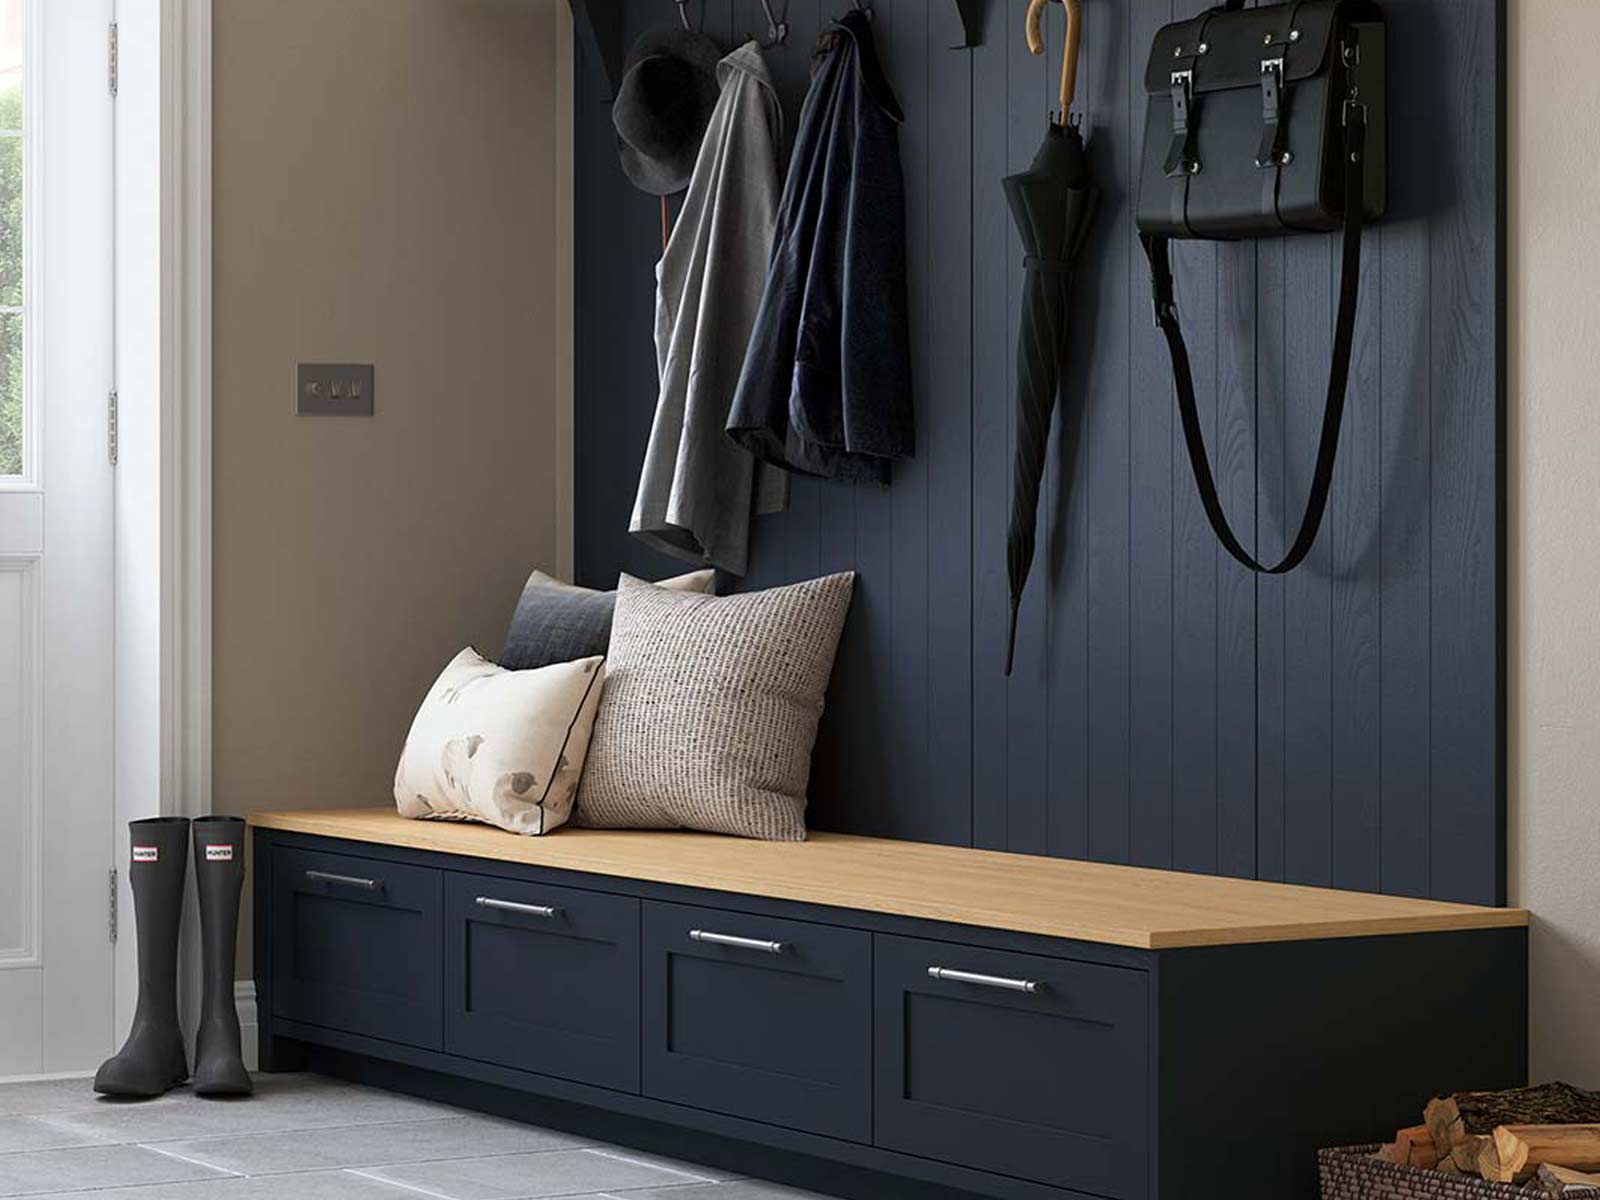 Utility room chair and clothes hangars in dark blue and oak